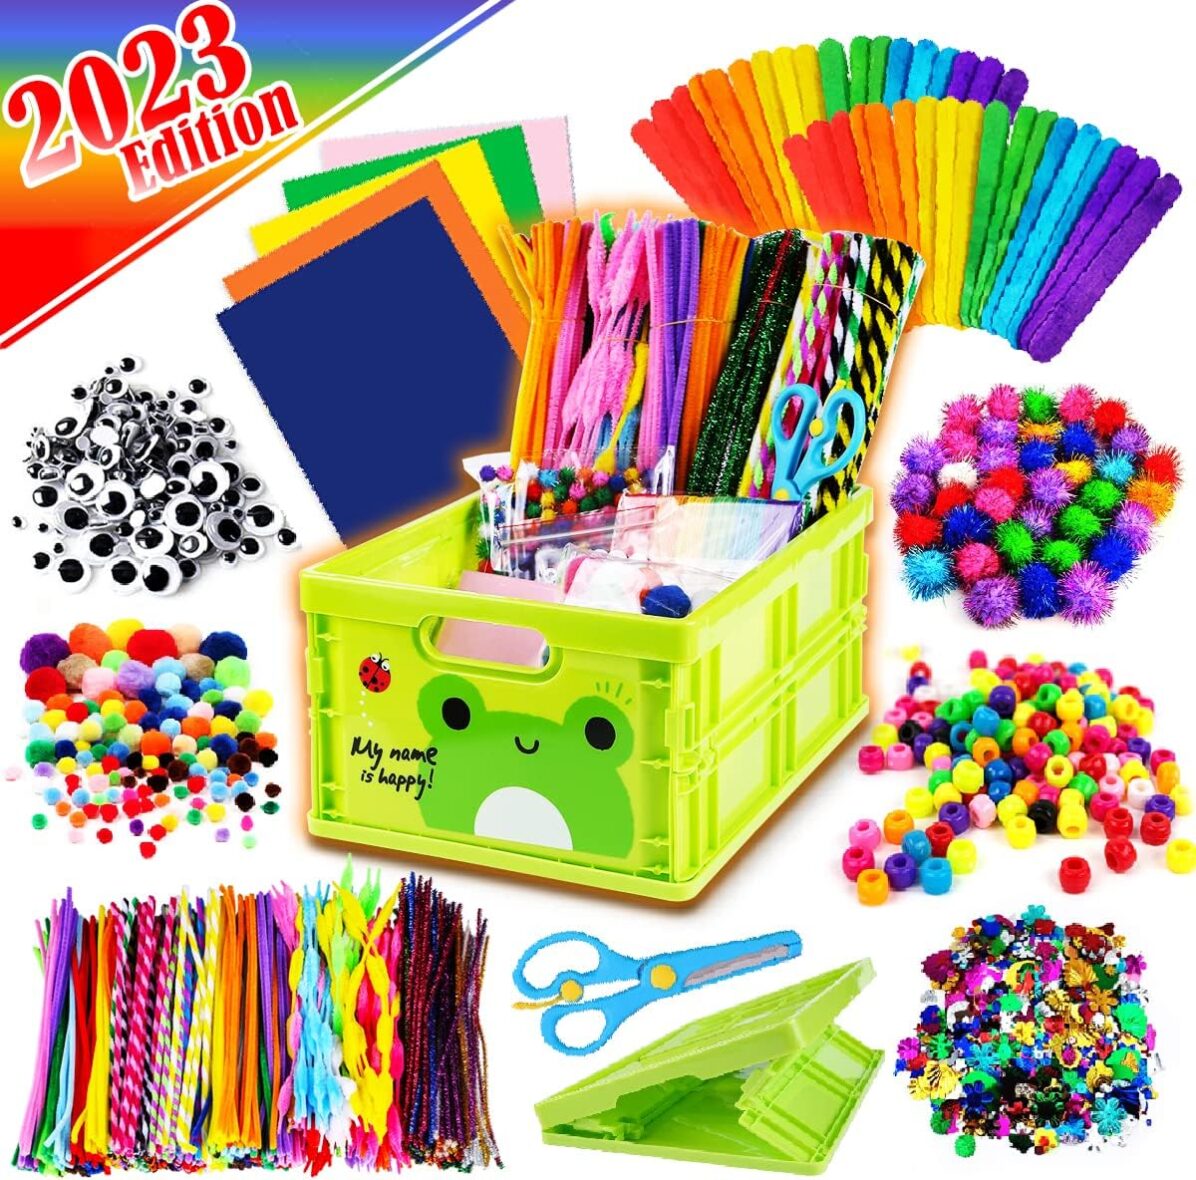 FUNZBO Arts and Crafts Supplies for Kids – Kids Crafts for Kids Ages 4-8 with Construction Paper, Pom Poms, Googly Eyes & Pony Beads, Crafts Activties Set, Arts and Crafts for Kids Ages 8-12